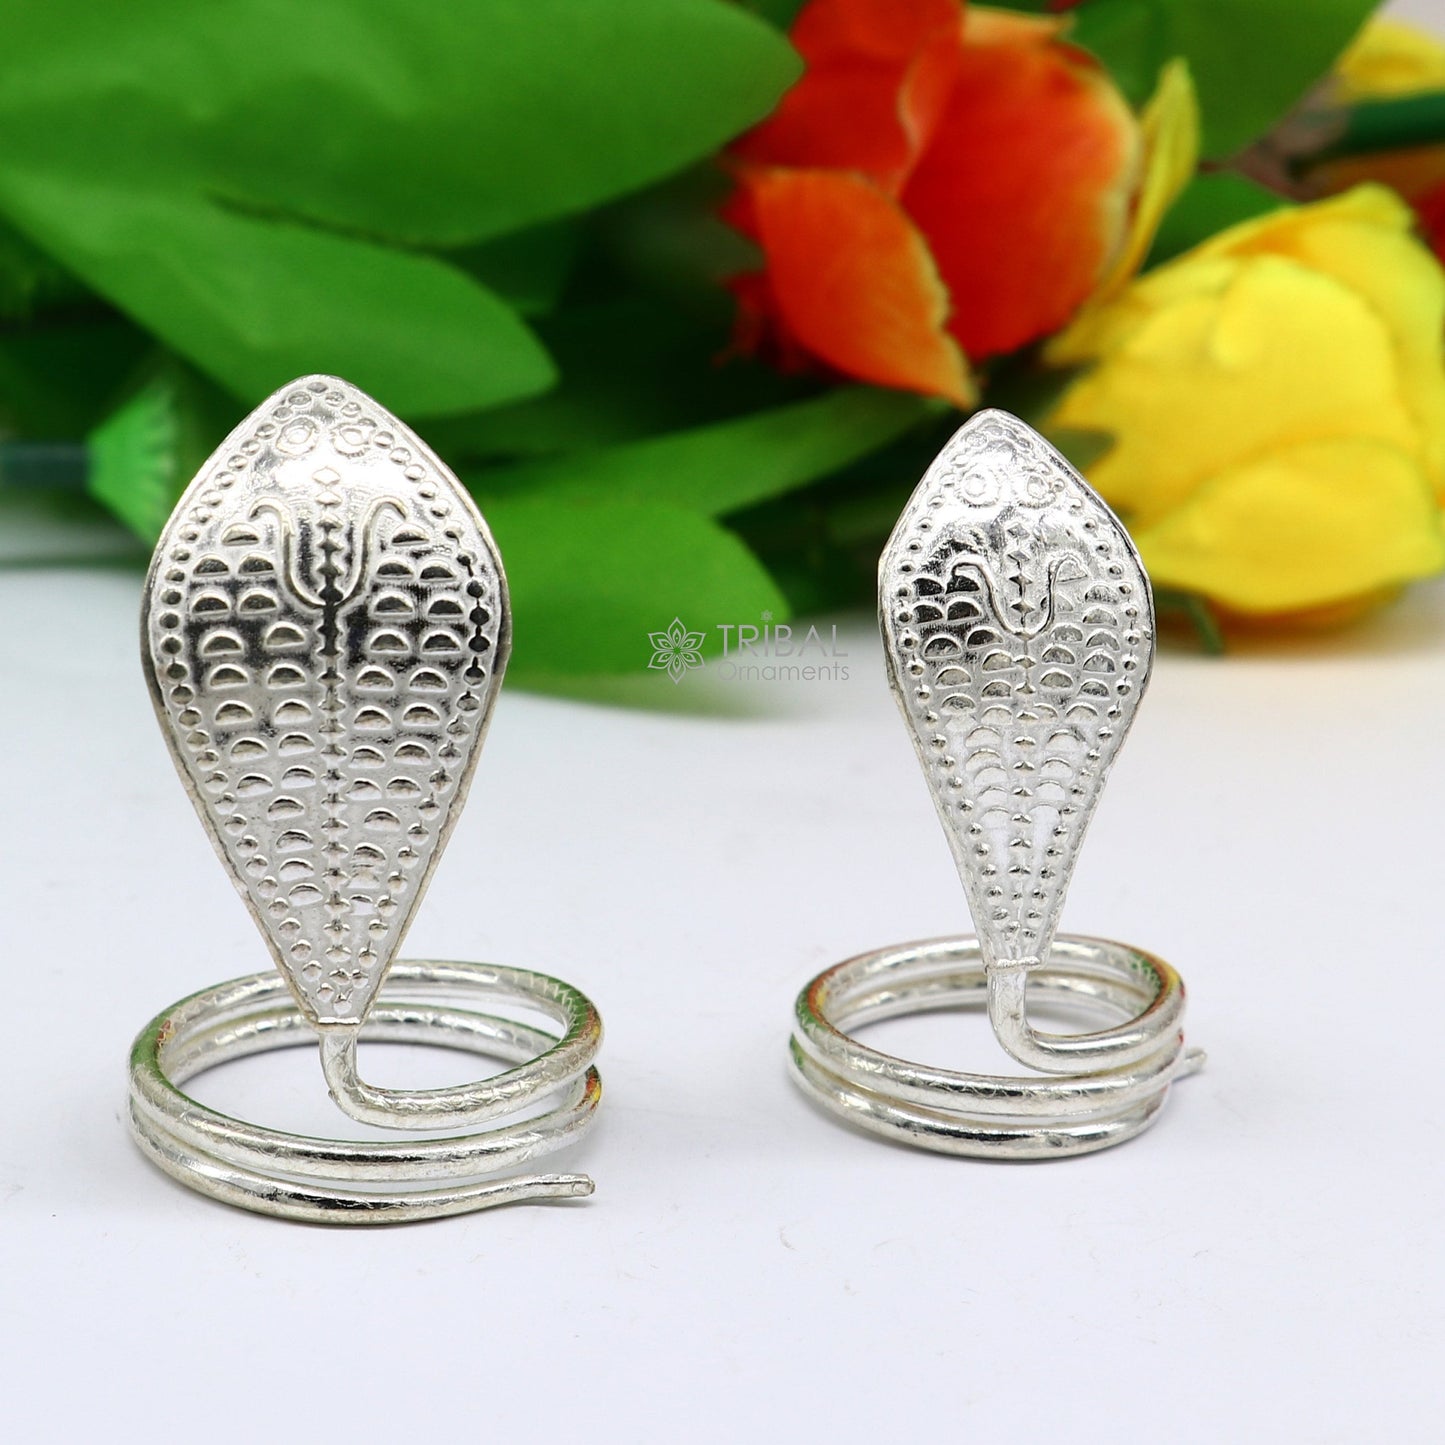 925 Sterling silver handmade Nag Nagin snake joda pair for puja or worshipping and use for Vaastu for constricting new home  su1032 - TRIBAL ORNAMENTS